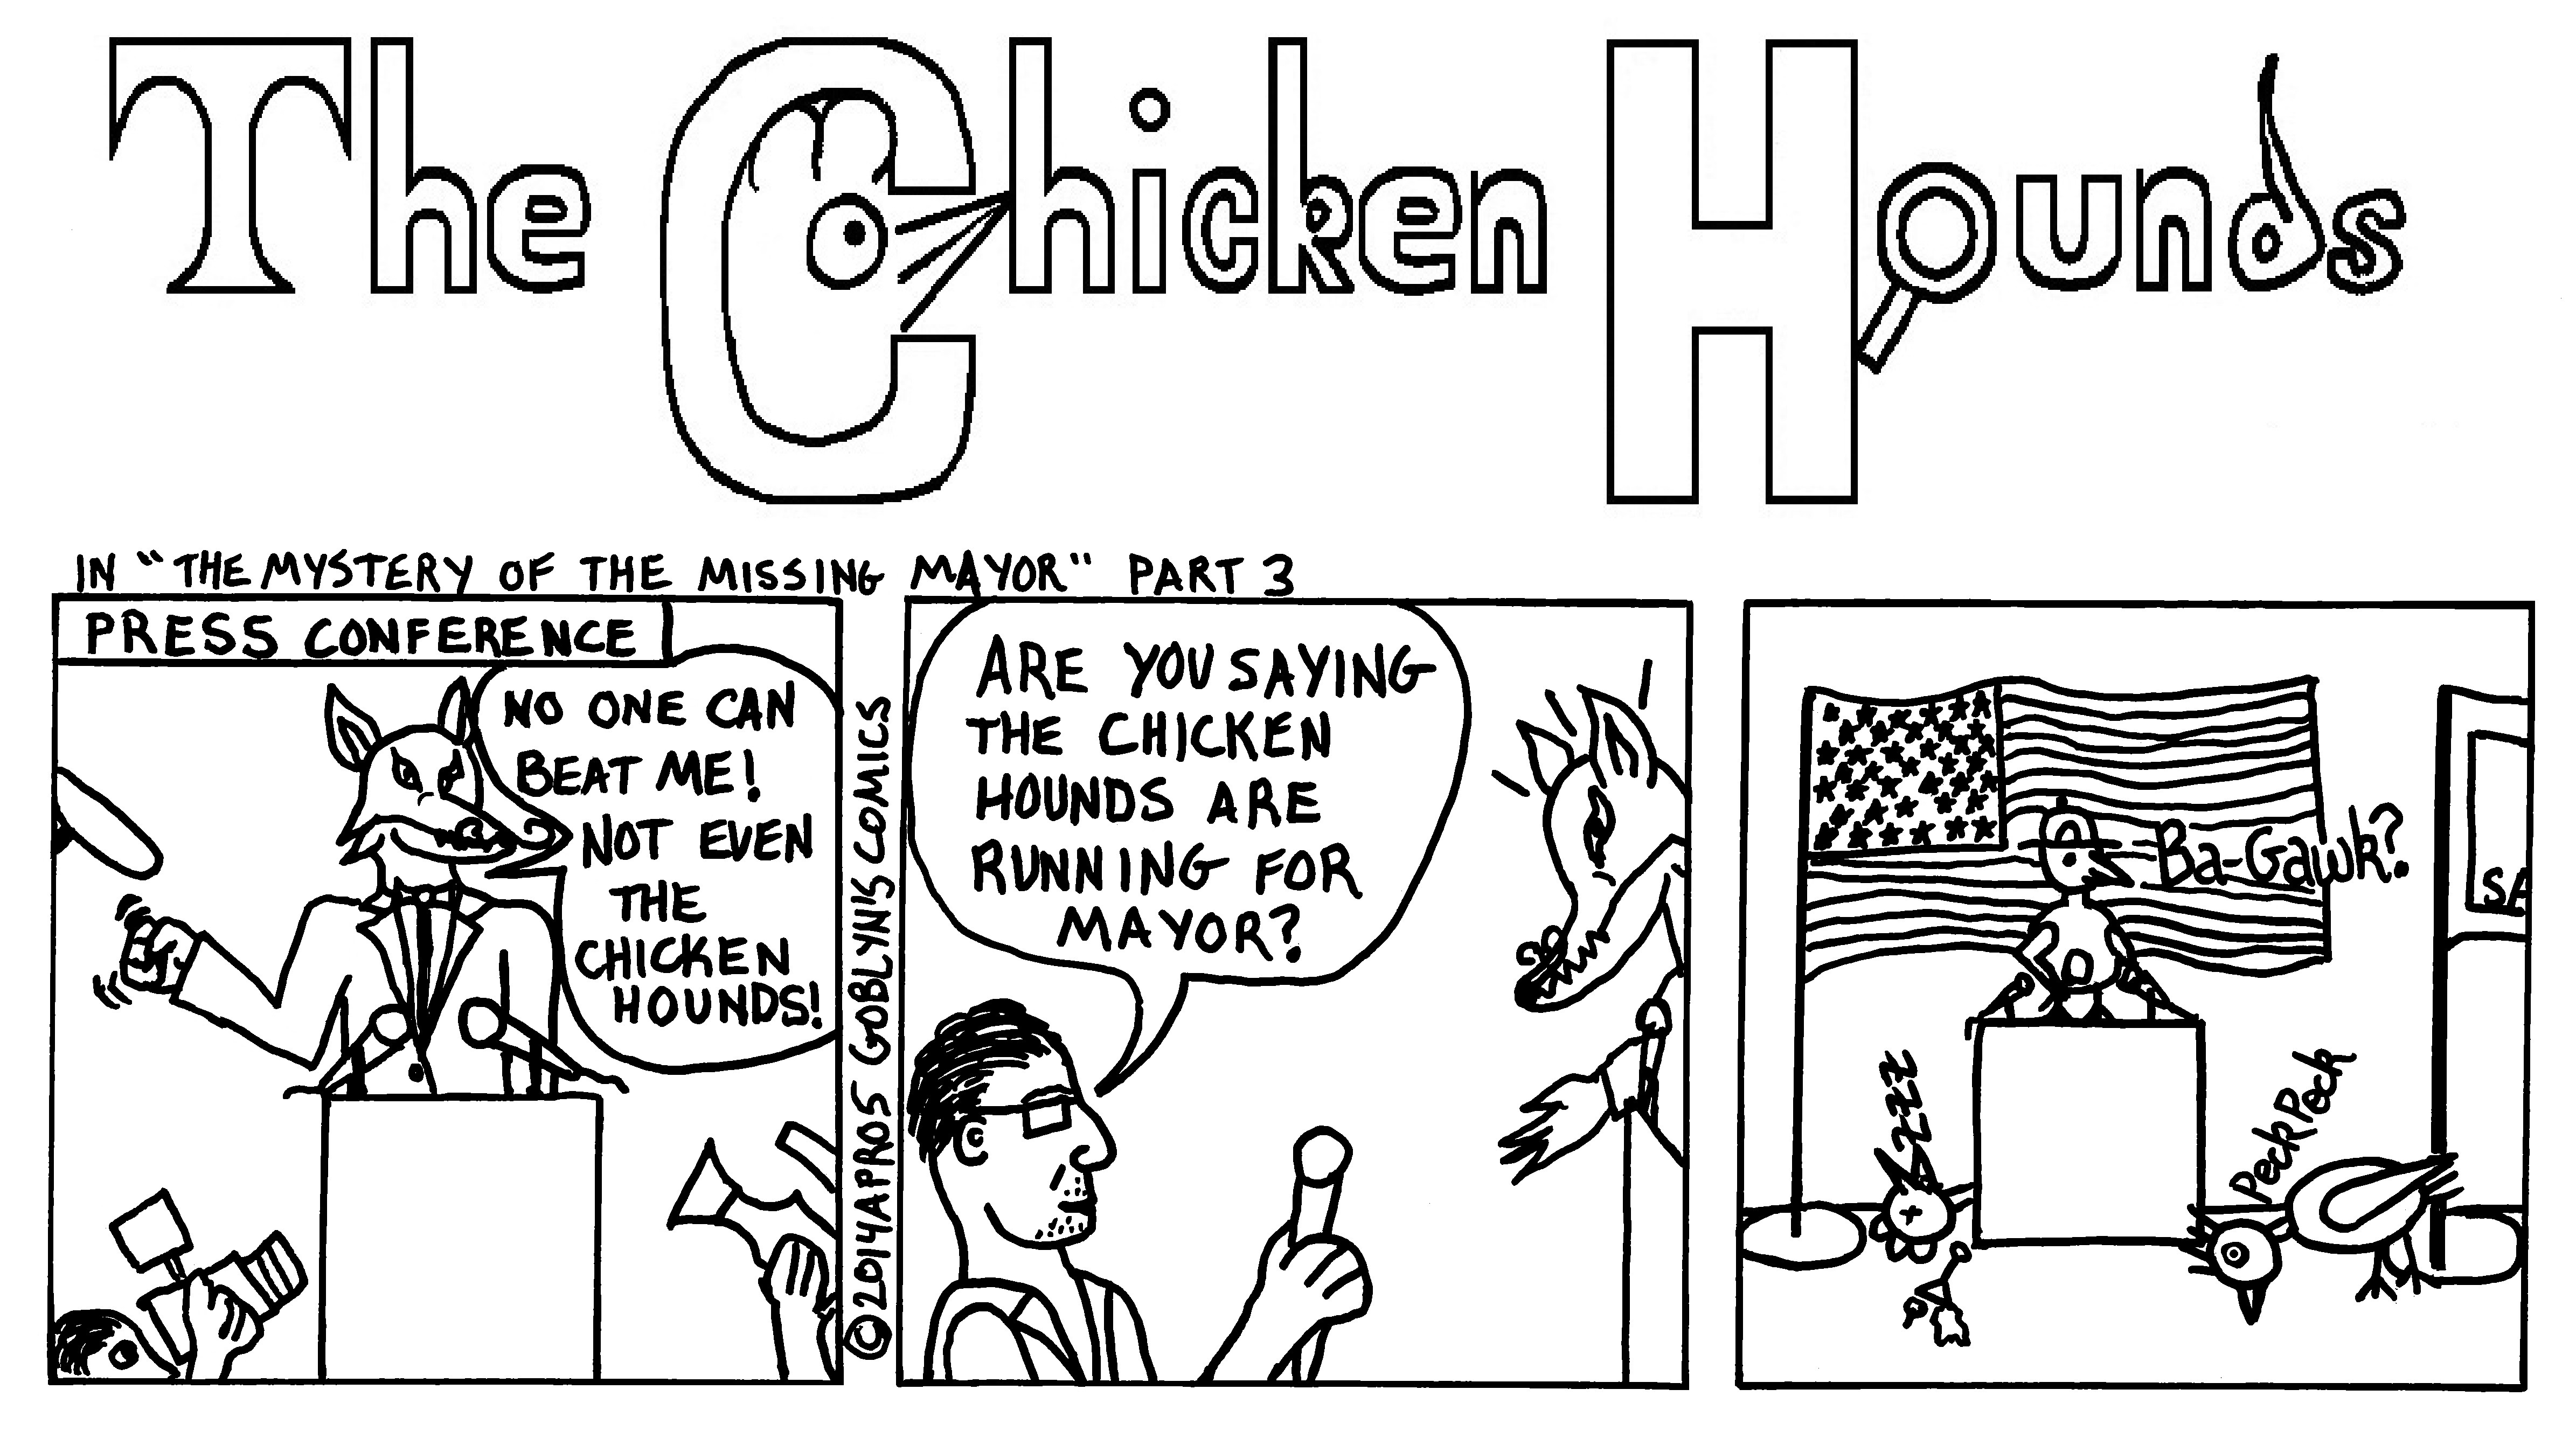 The Chicken Hounds, San Francisco's Greatest Detectives, in "The Mystery of the Missing Mayor" Part 3. Scoop Newsworty, Ace Reporter, asks "Are you saying the Chicken Hounds are running for Mayor?"